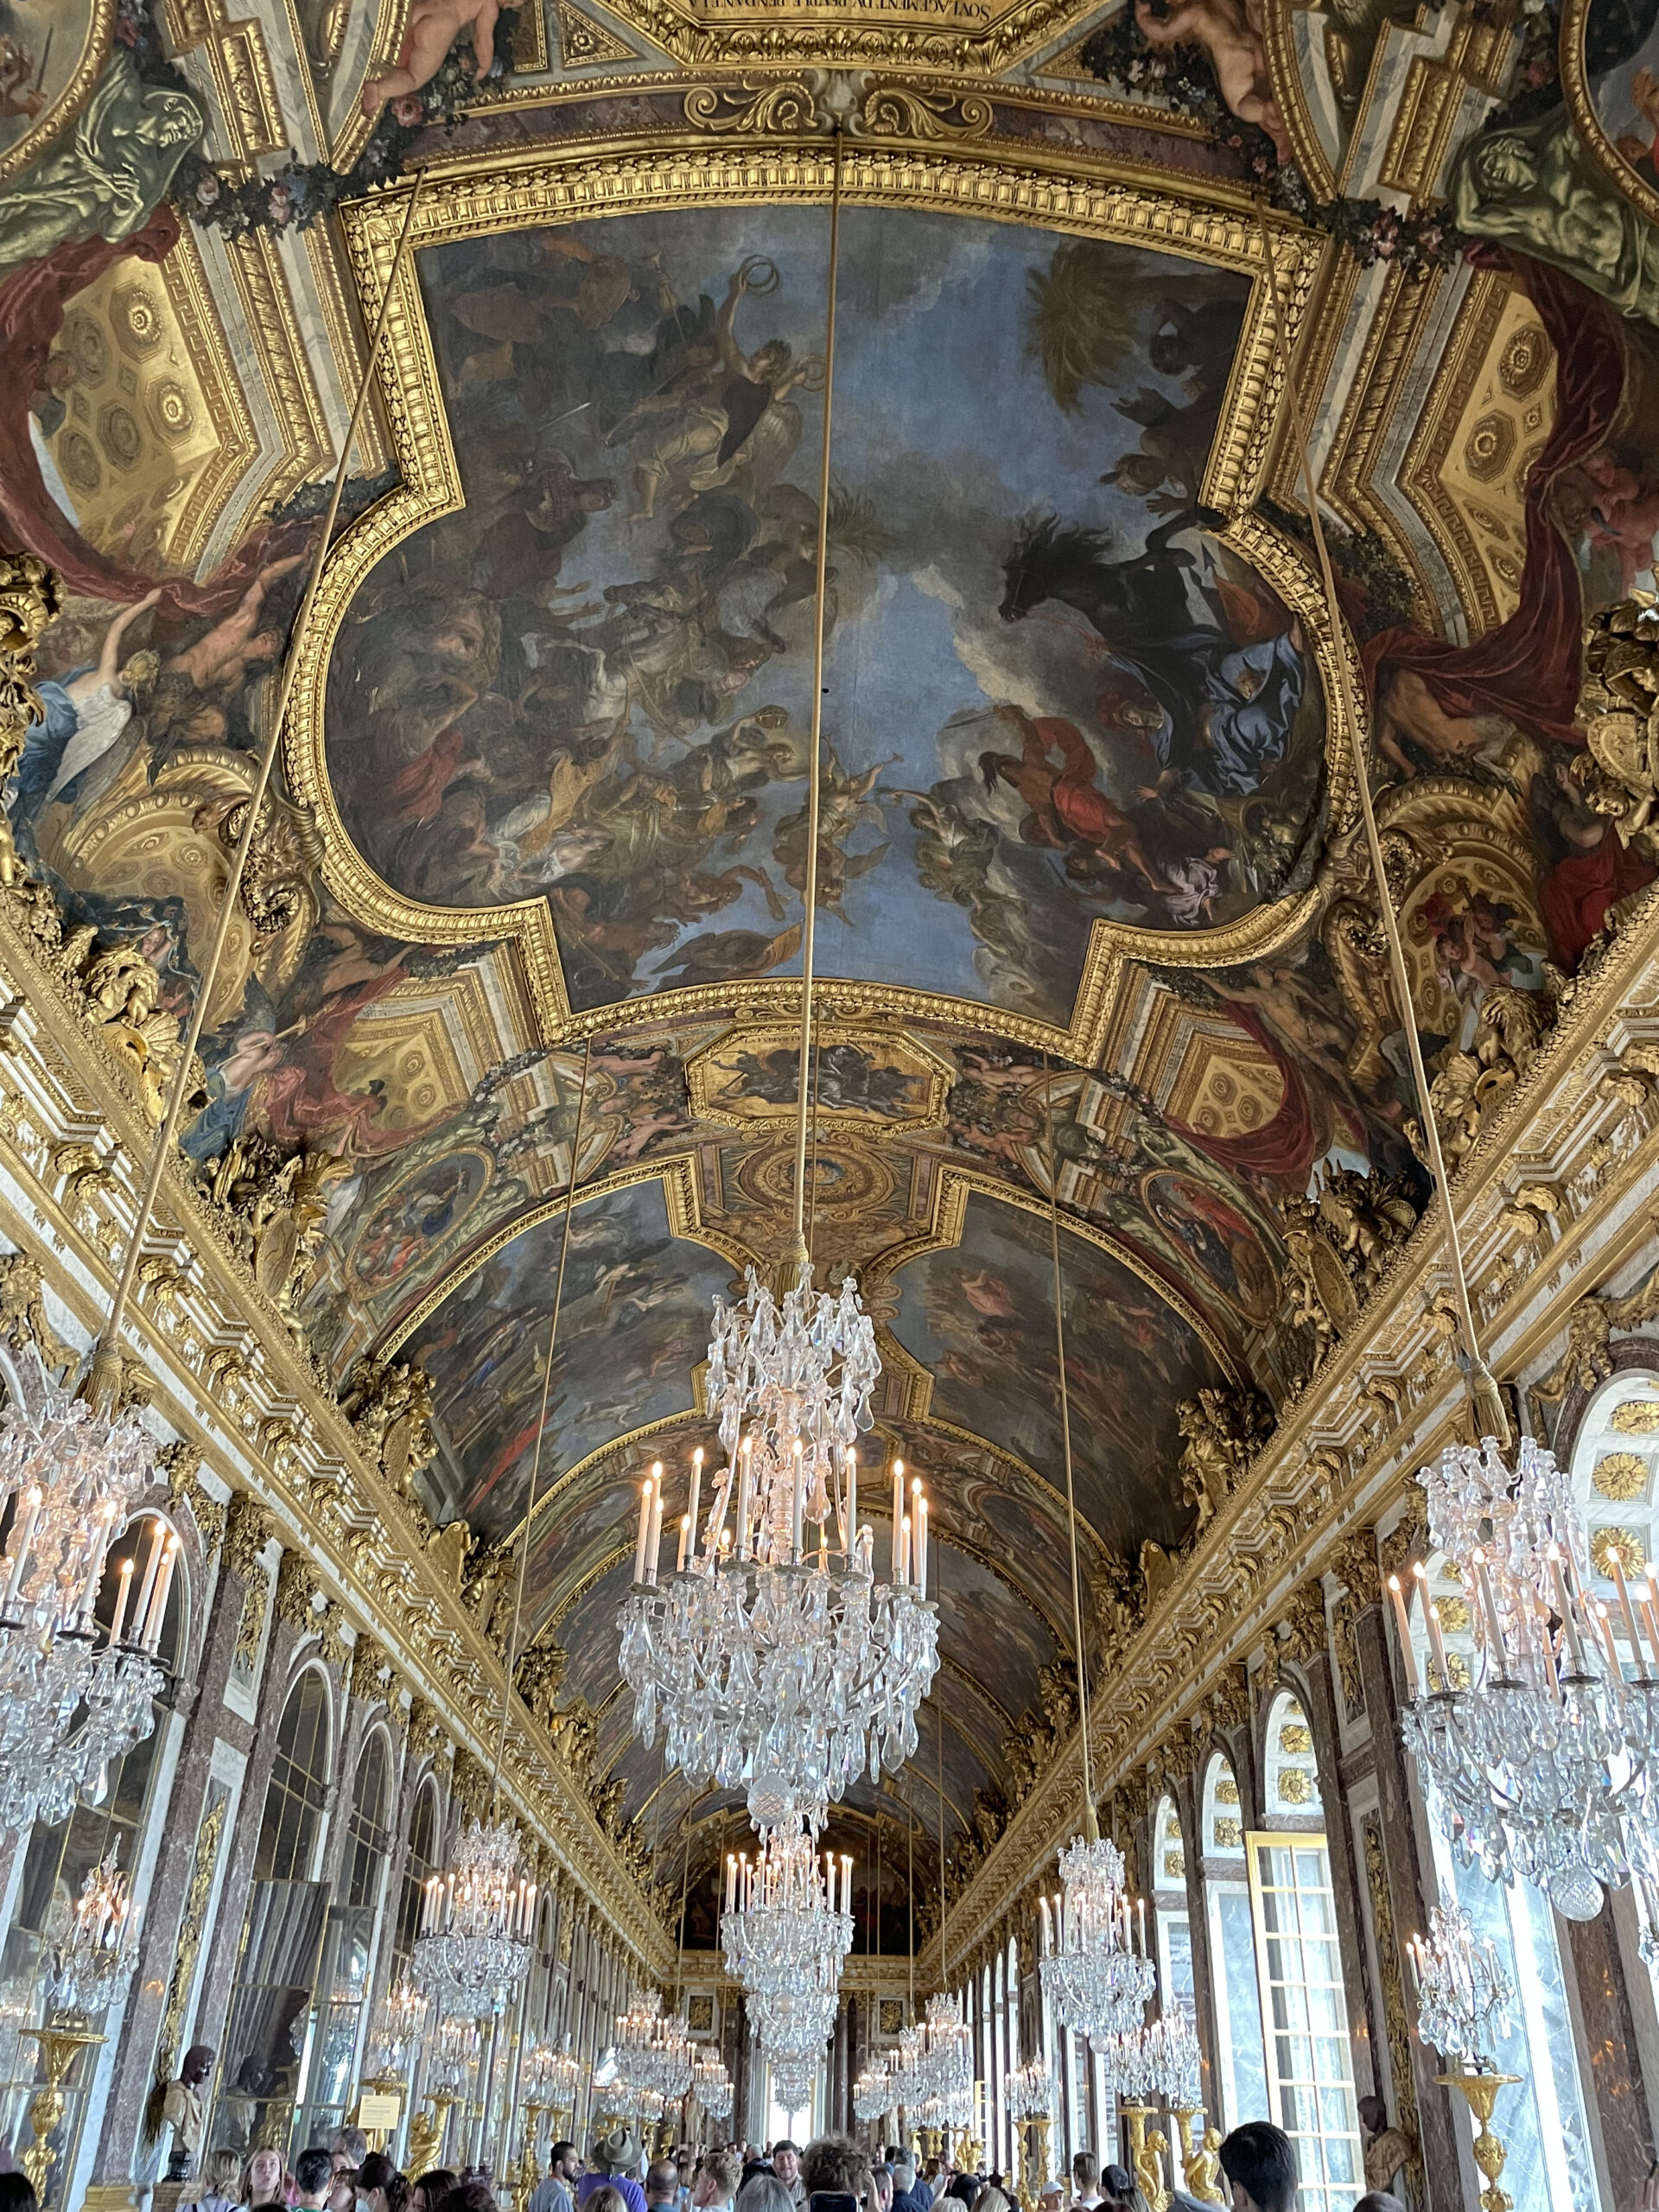 Trip to the Palace of Versailles